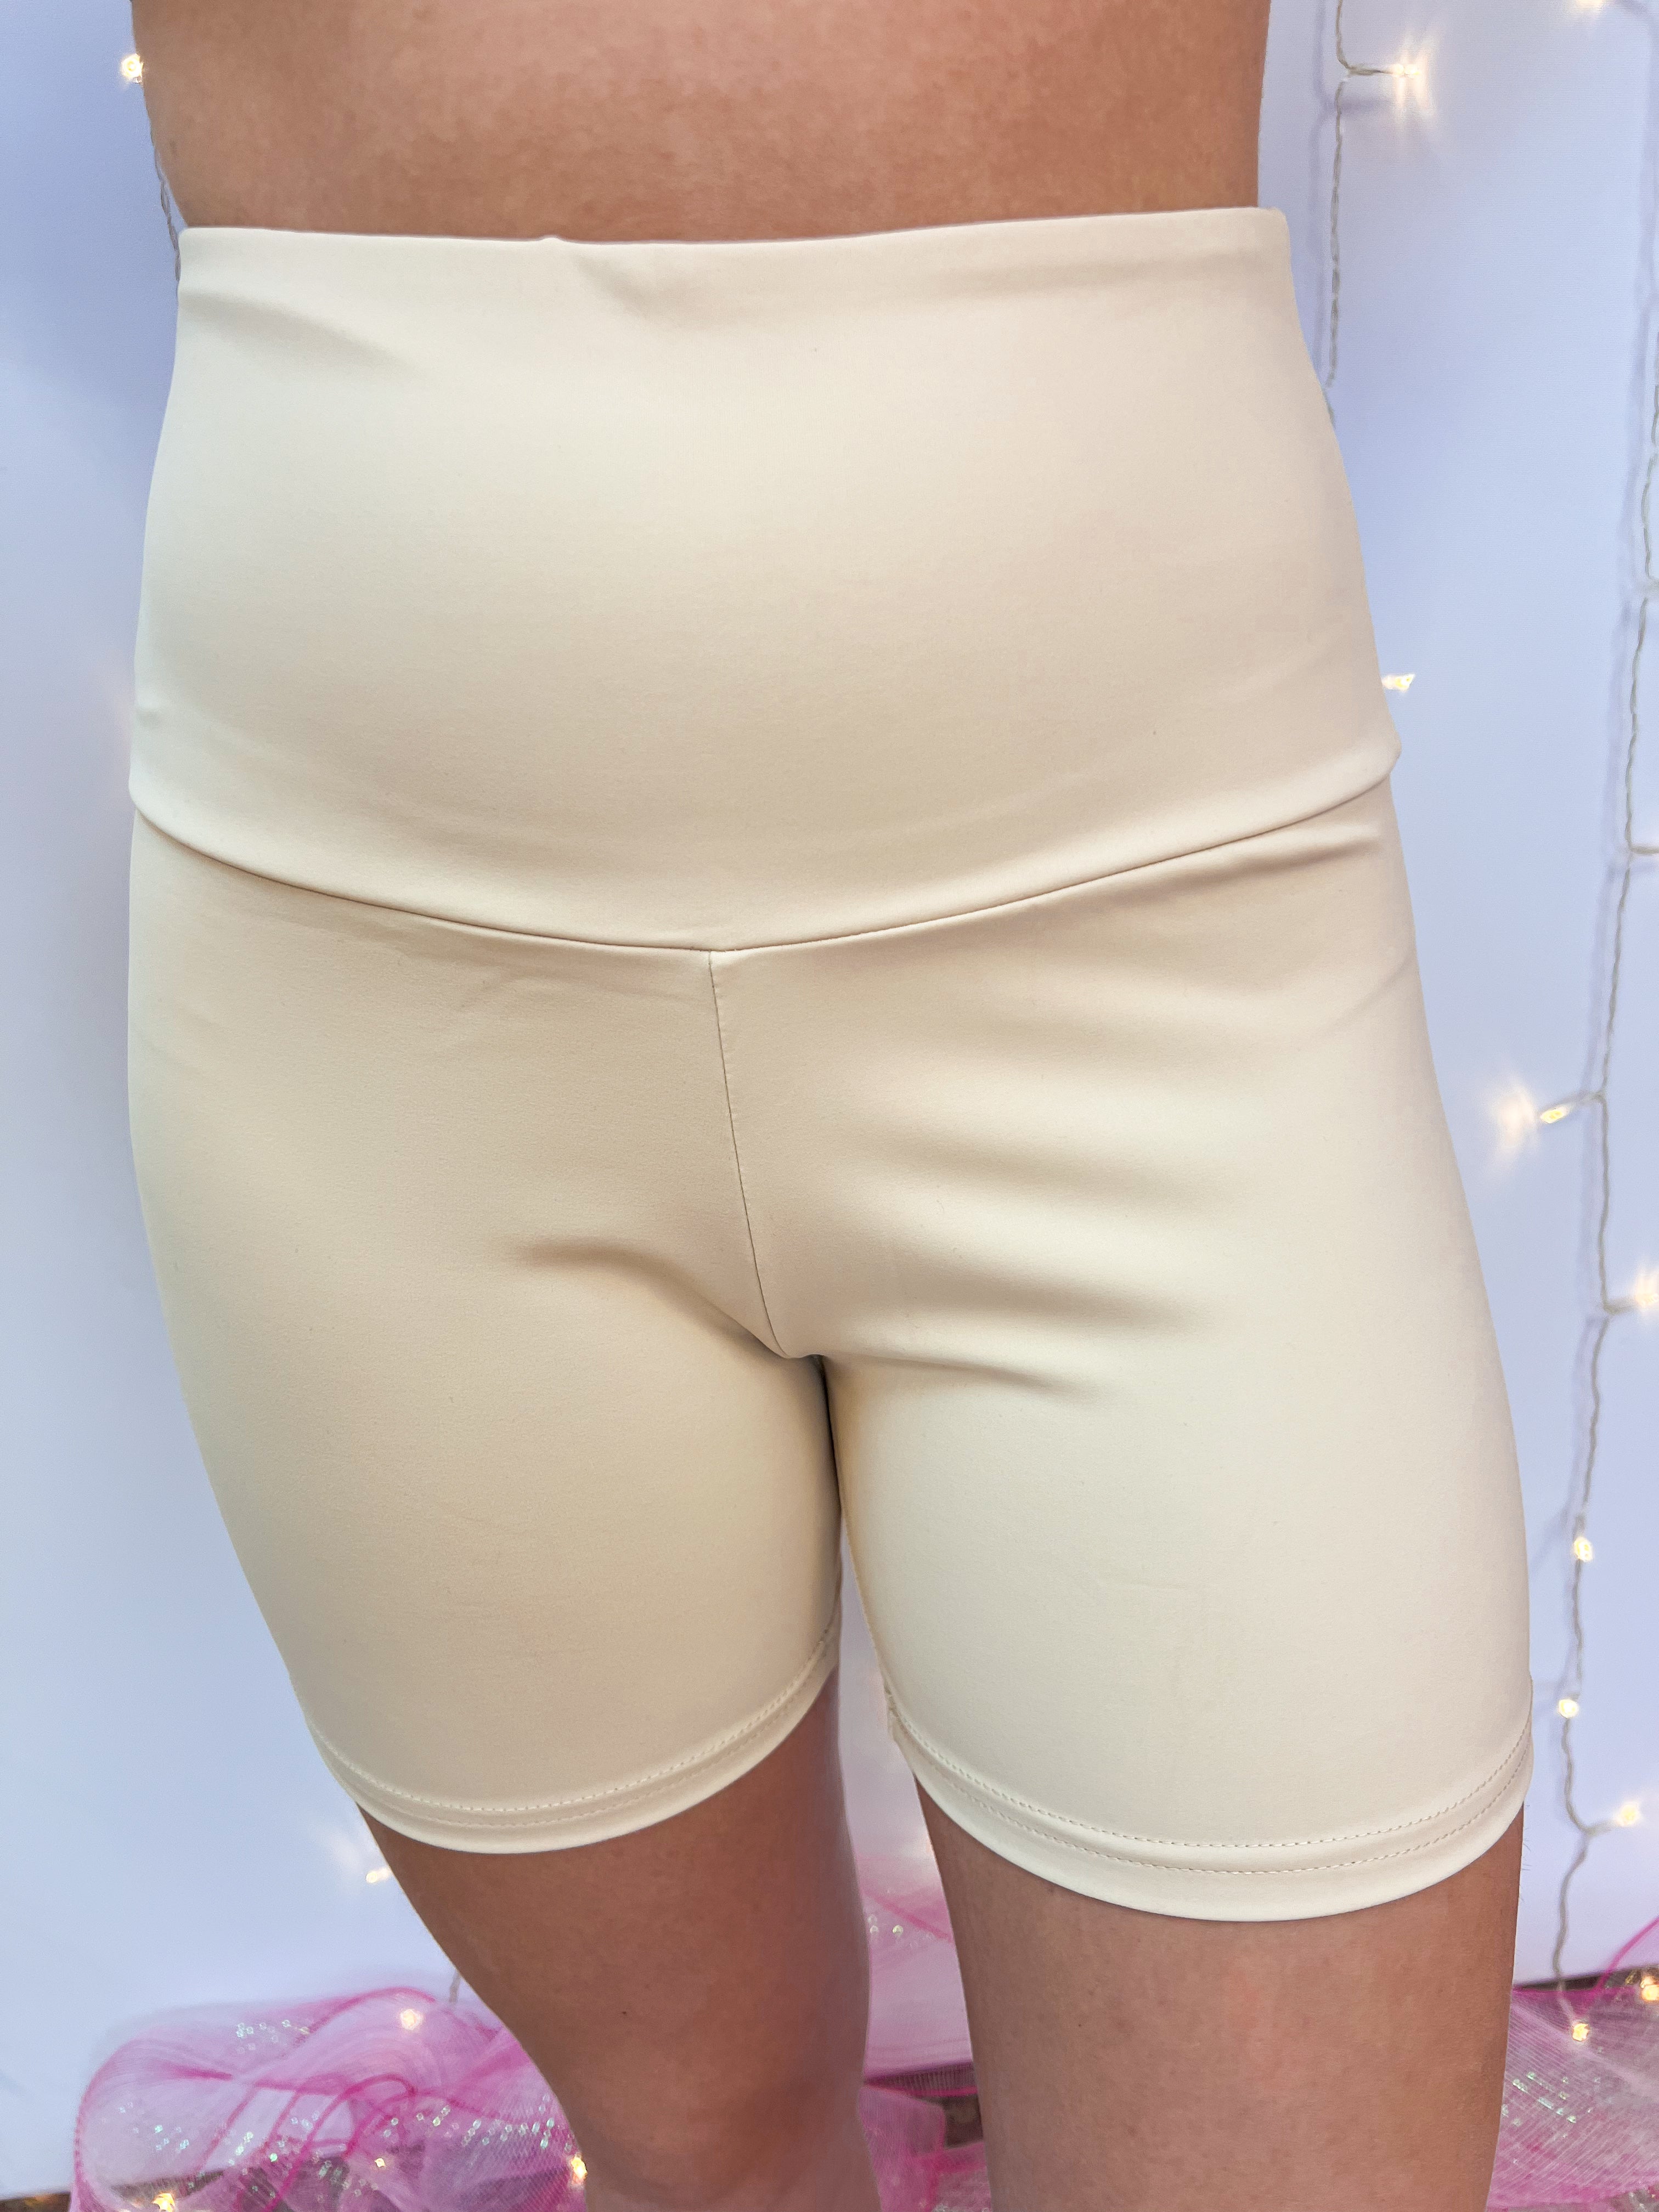 Nude Shapewear Shorts-230 Skirts/Shorts-The Lovely Closet-The Lovely Closet, Women's Fashion Boutique in Alexandria, KY